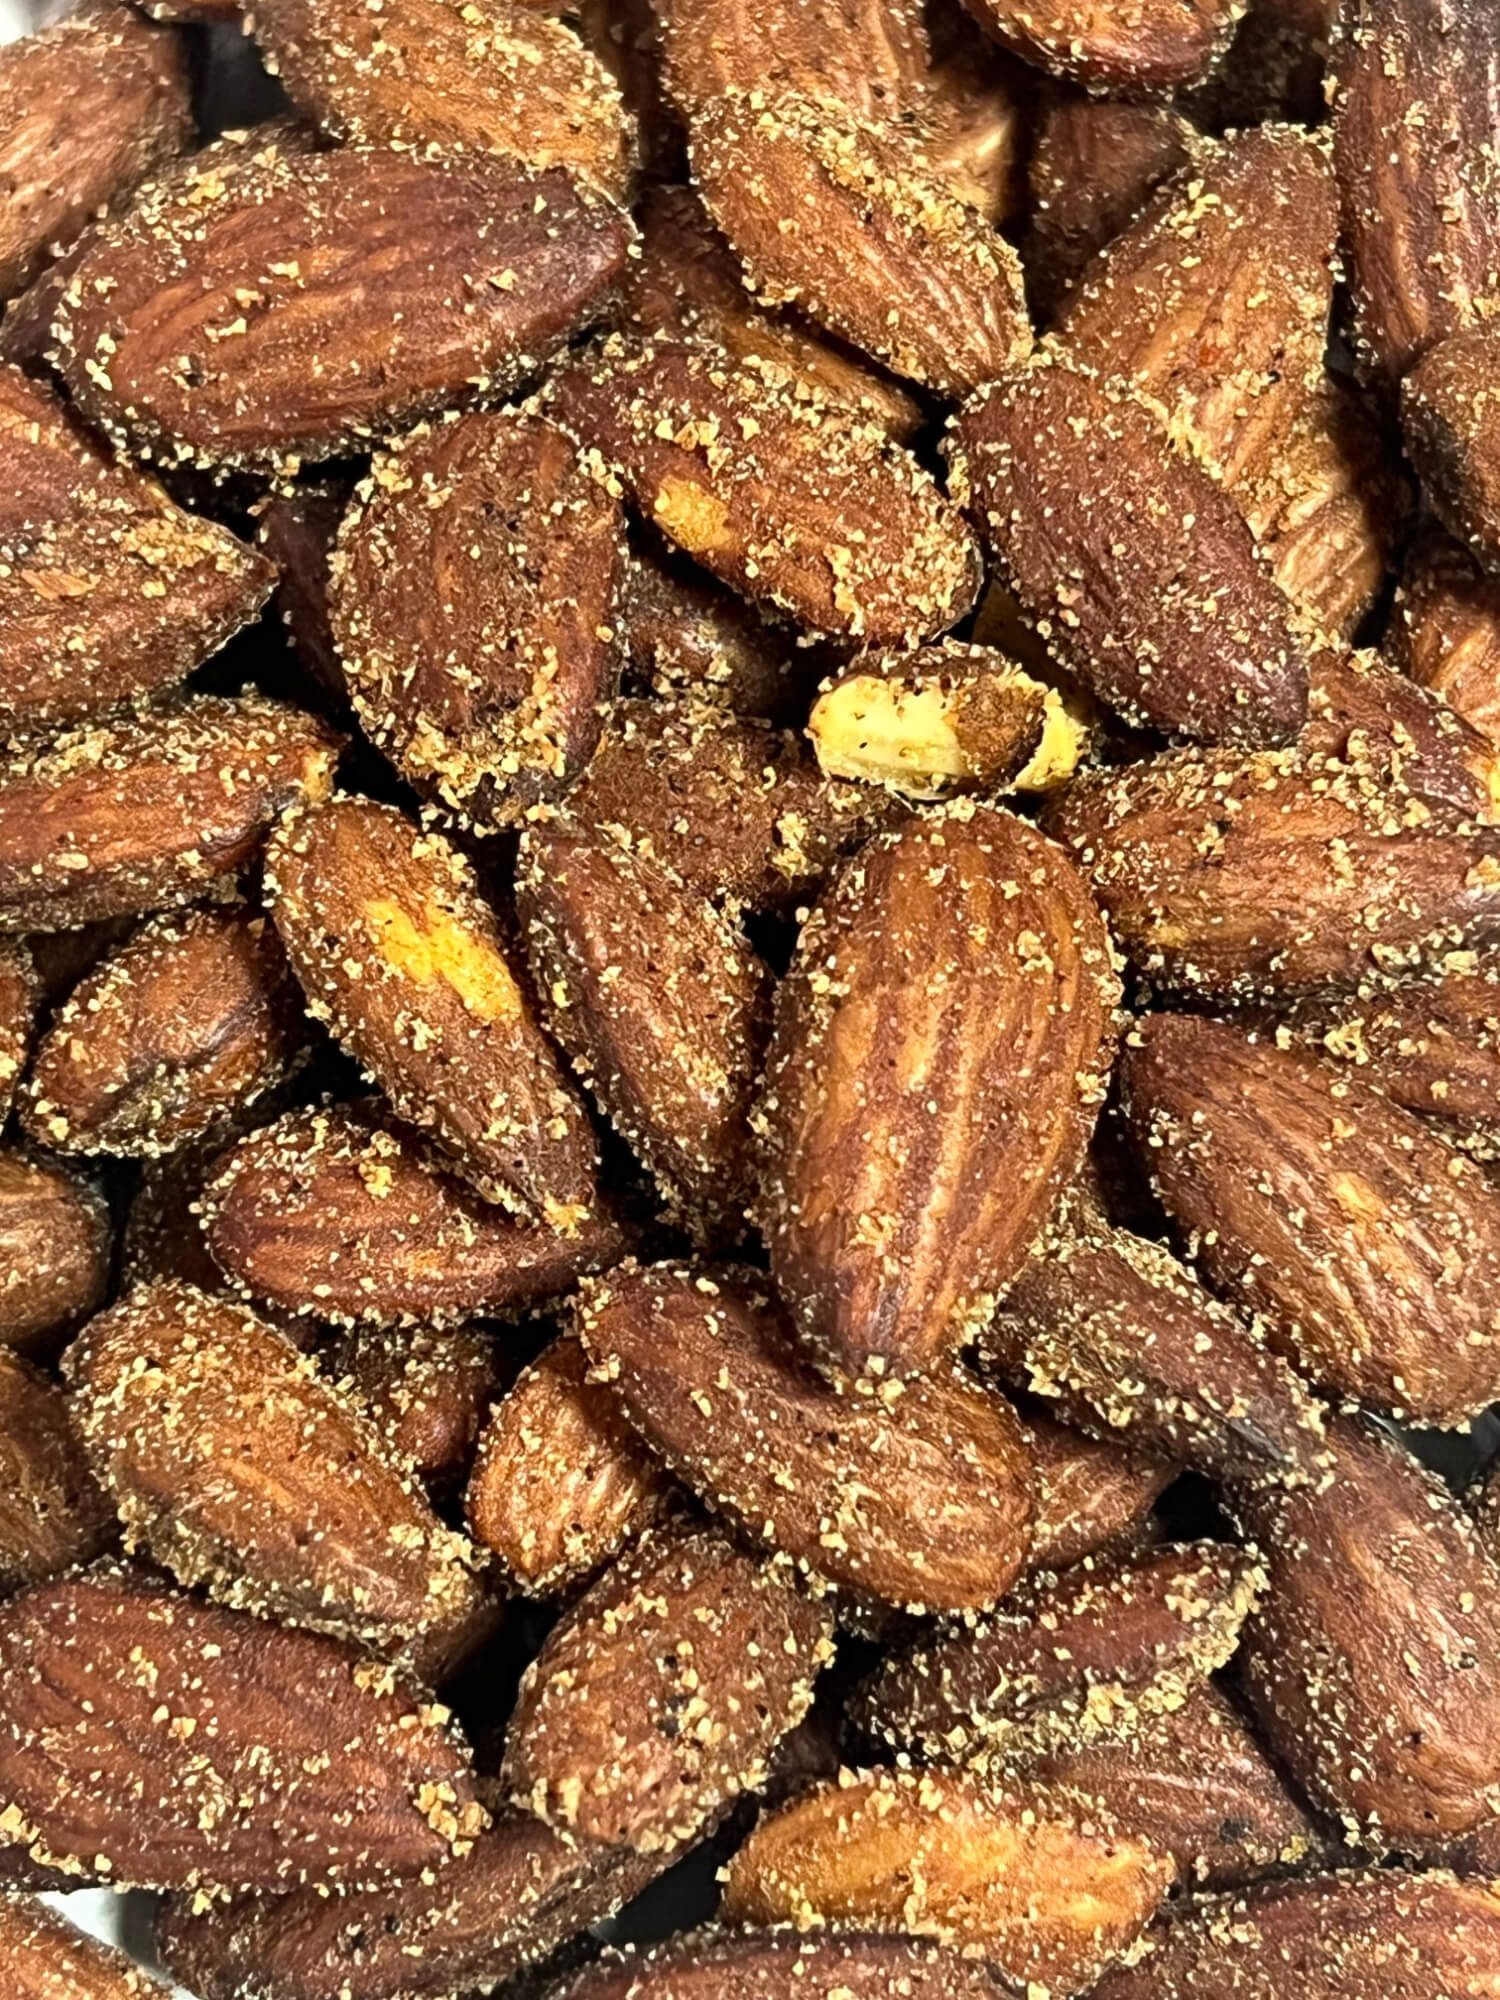 A close up of a pile of roasted almonds on a table.